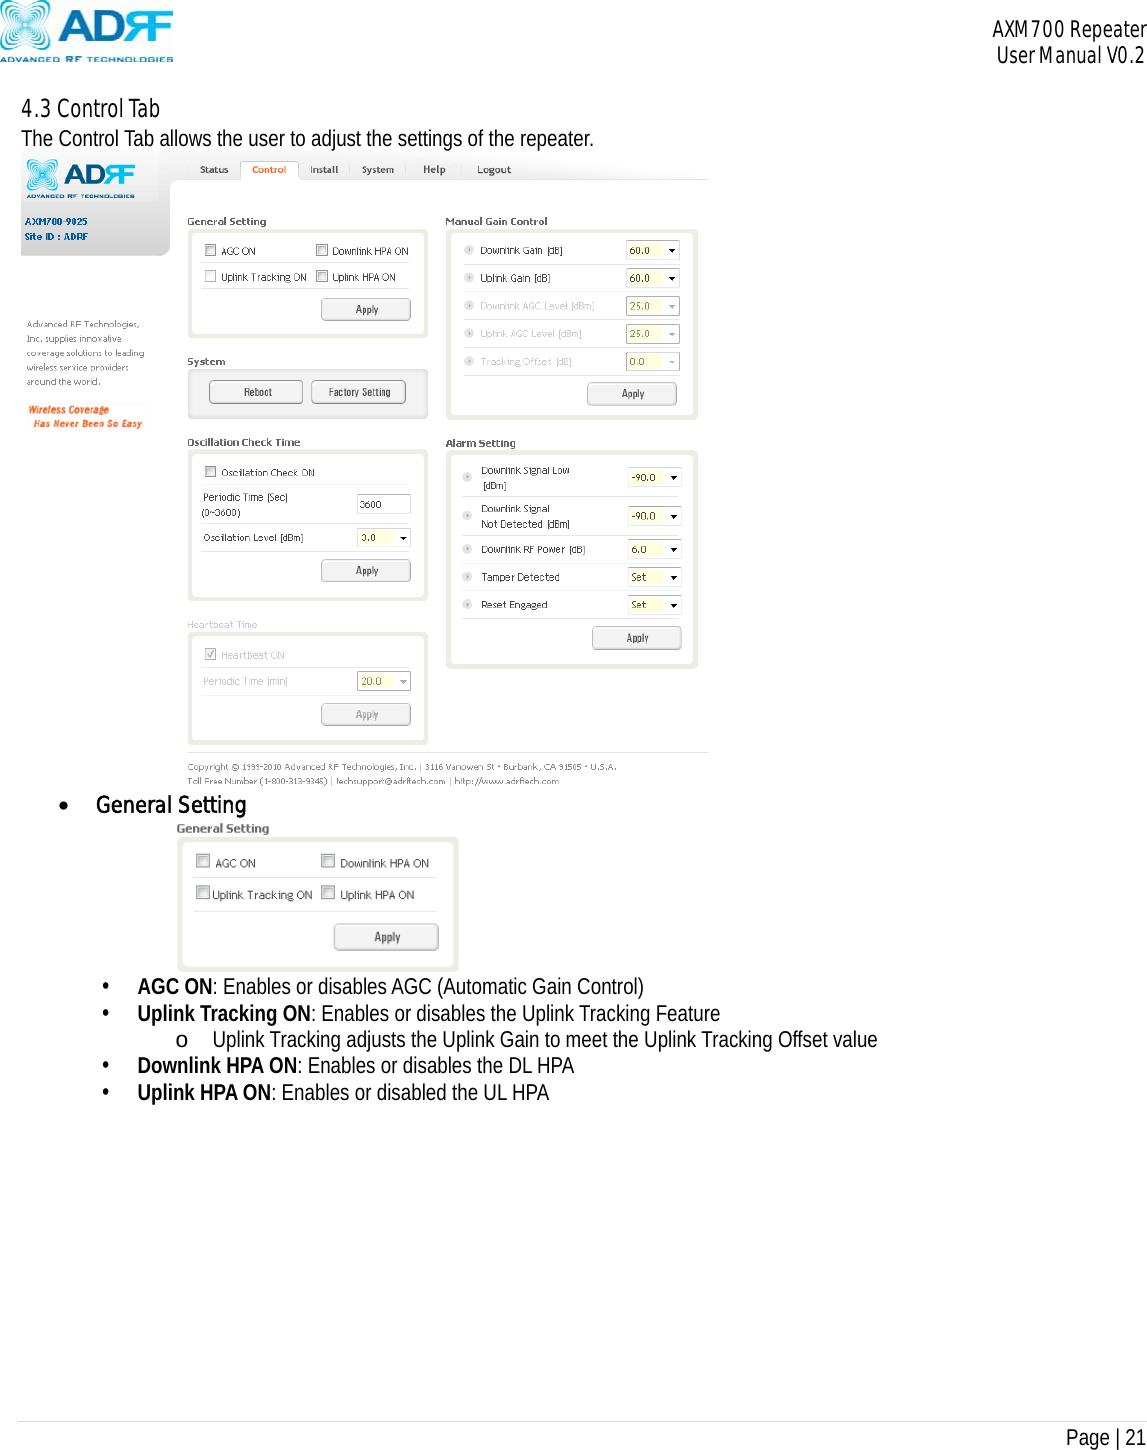 AXM700 Repeater     User Manual V0.2  Page | 21    4.3 Control Tab The Control Tab allows the user to adjust the settings of the repeater.   General Setting  • AGC ON: Enables or disables AGC (Automatic Gain Control) • Uplink Tracking ON: Enables or disables the Uplink Tracking Feature o Uplink Tracking adjusts the Uplink Gain to meet the Uplink Tracking Offset value • Downlink HPA ON: Enables or disables the DL HPA • Uplink HPA ON: Enables or disabled the UL HPA             